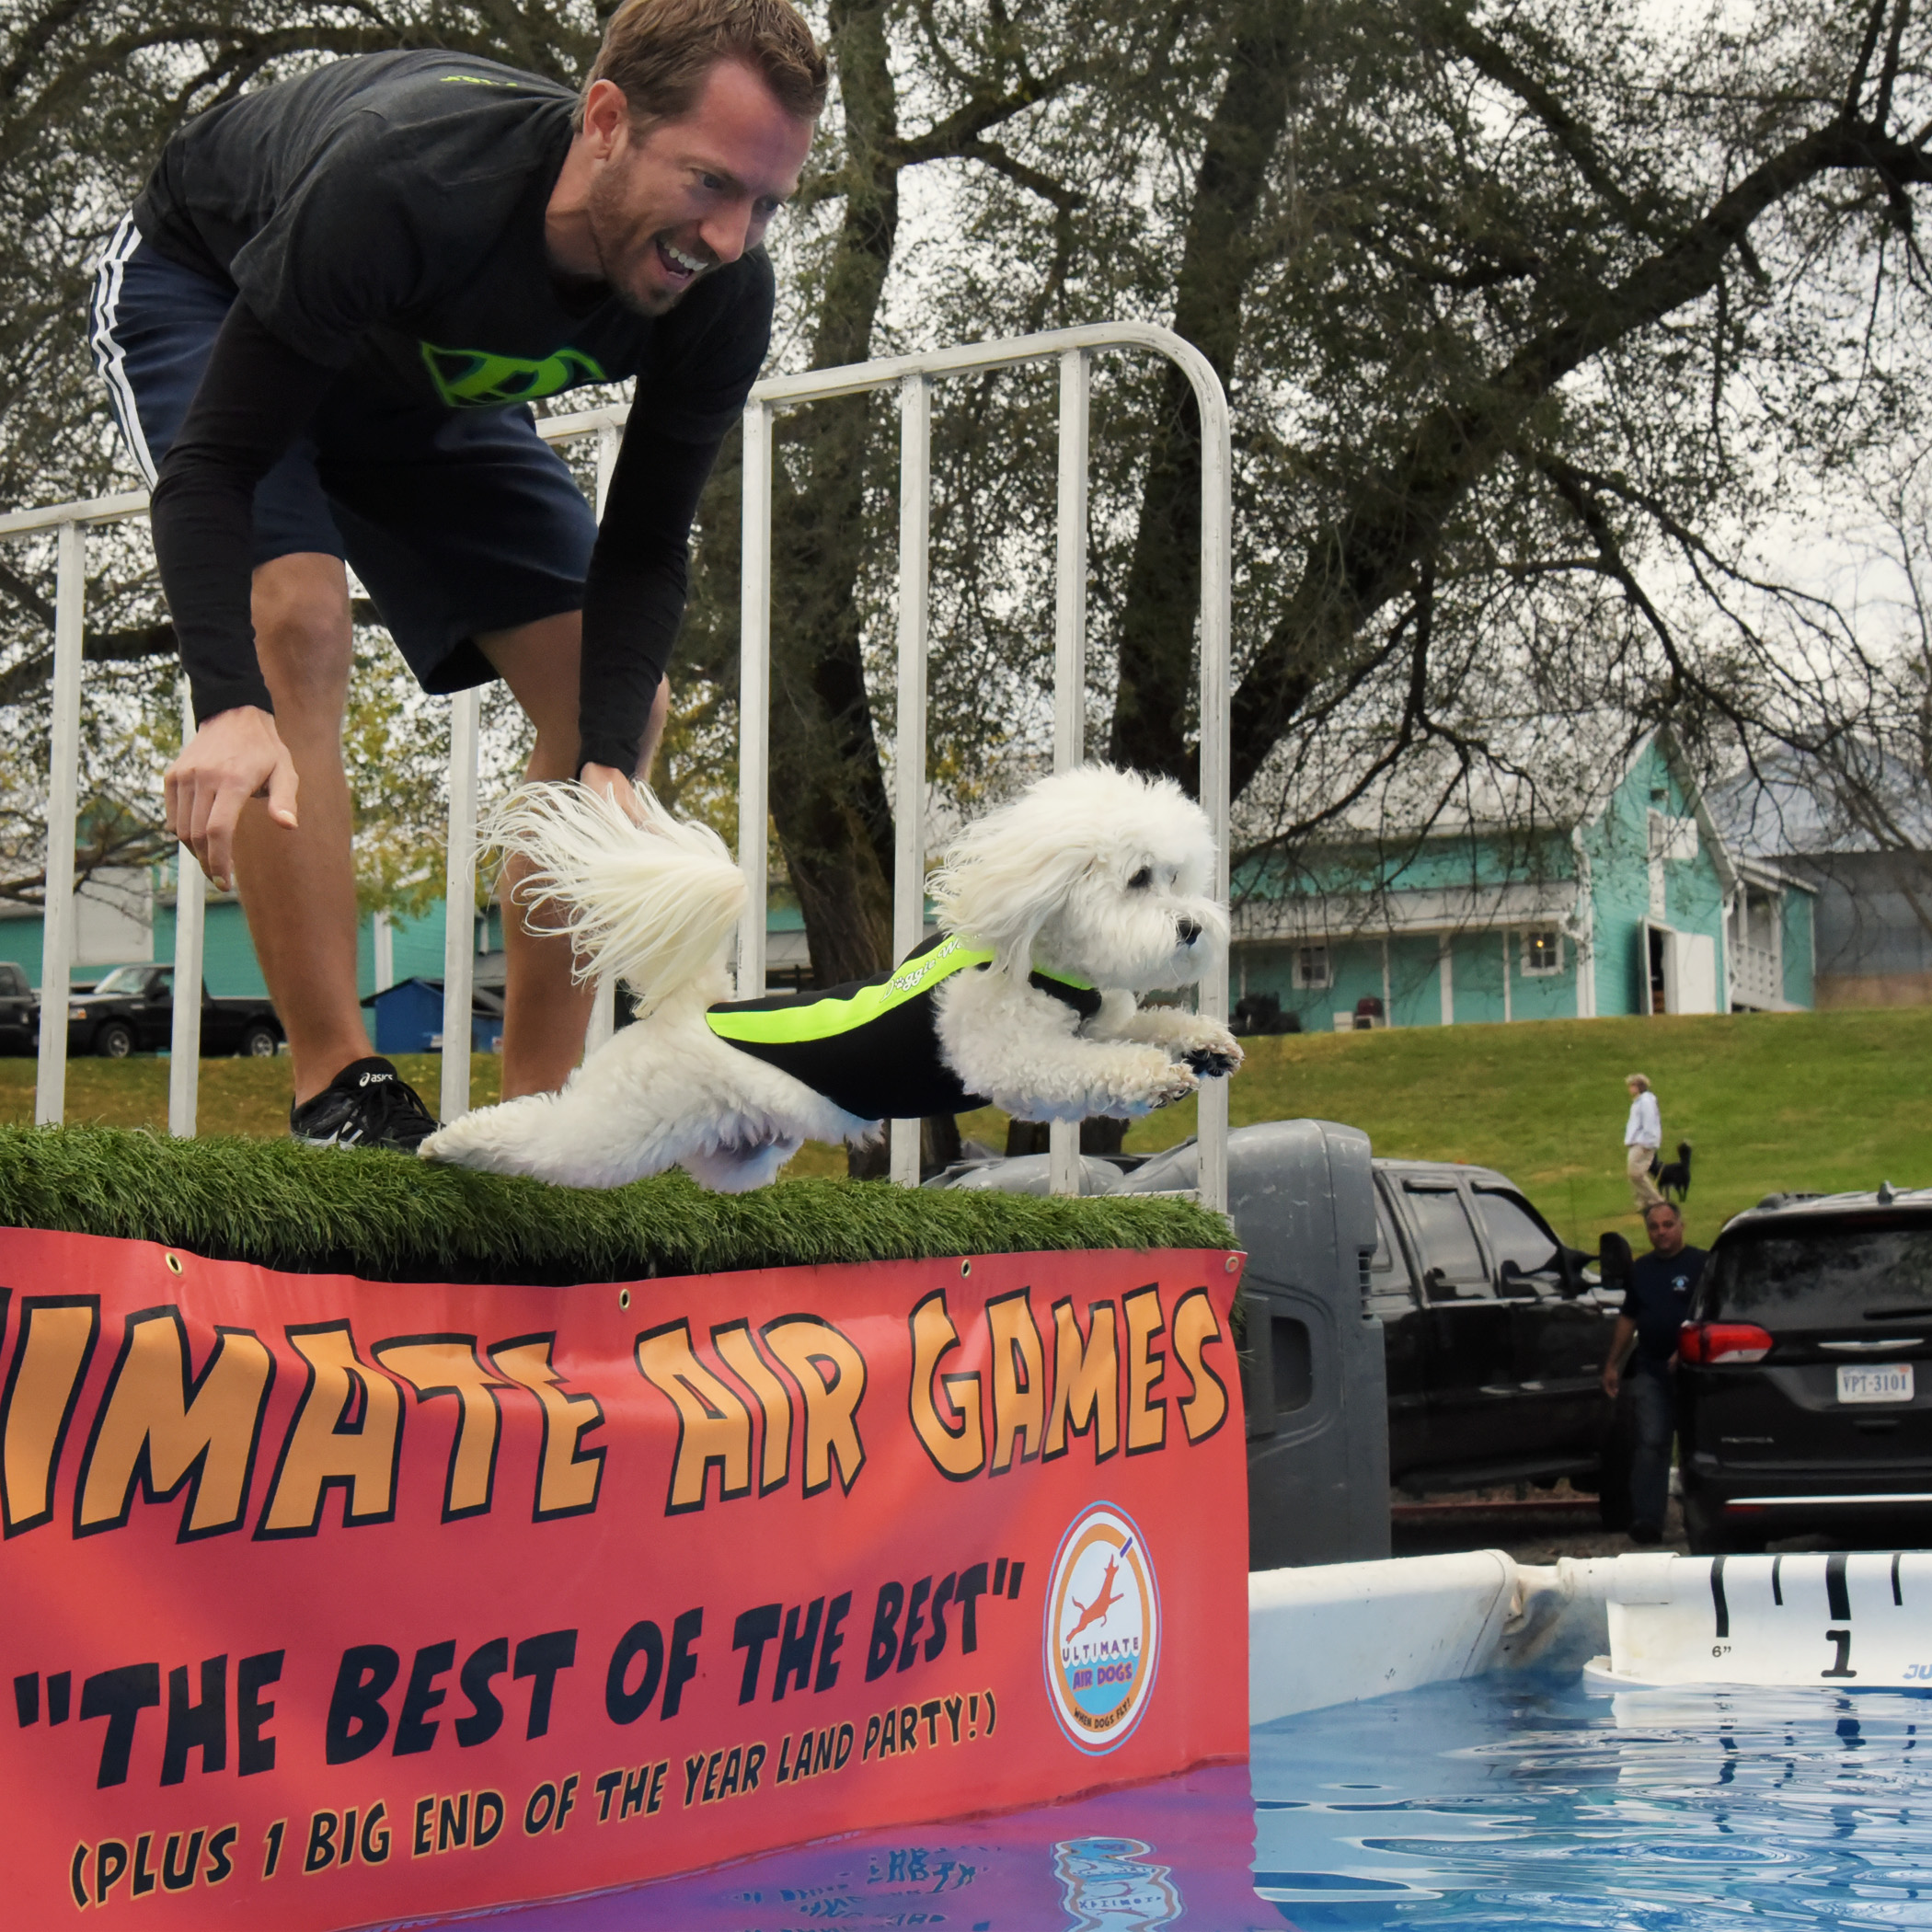  Bruiser’s very first (practice) jump into the pool was beautiful…nice and straight, full of power! 